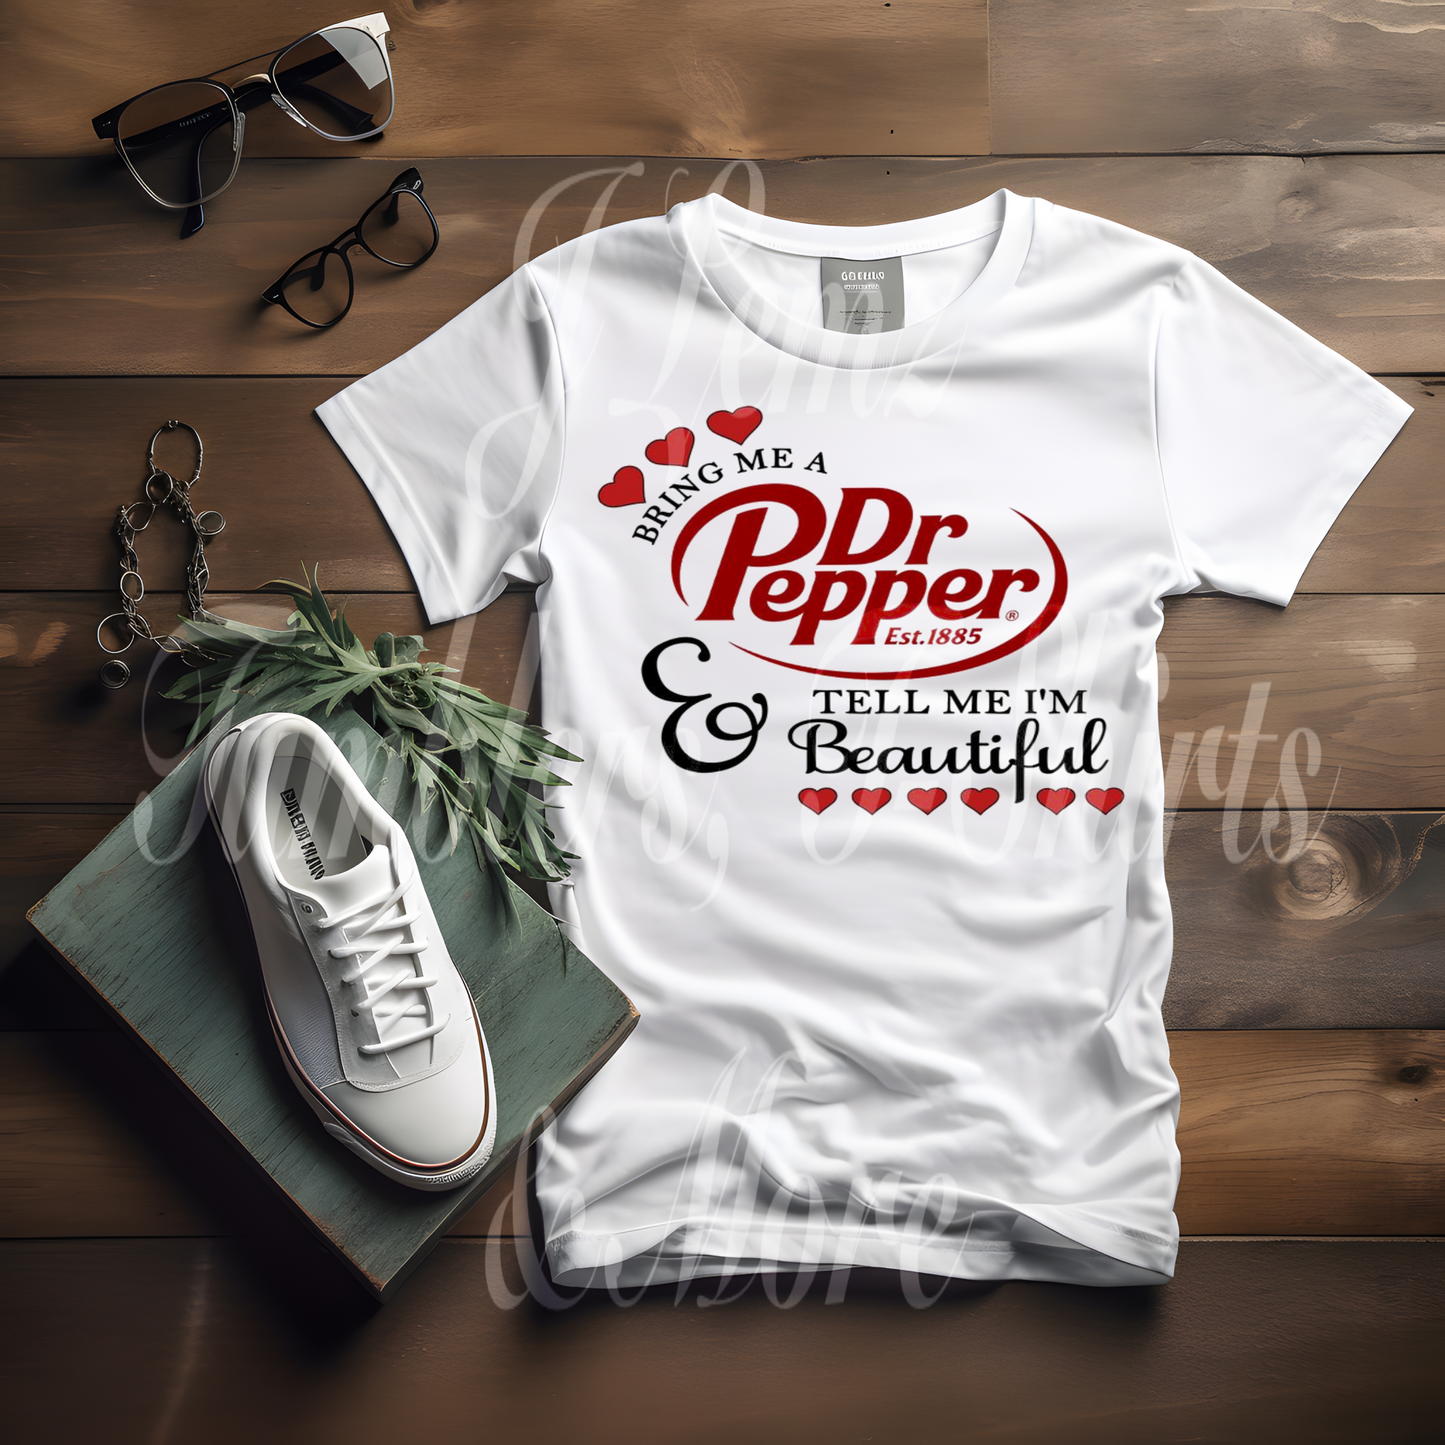 GIVE ME DR. PEPPER AND TELL ME IM PRETTY